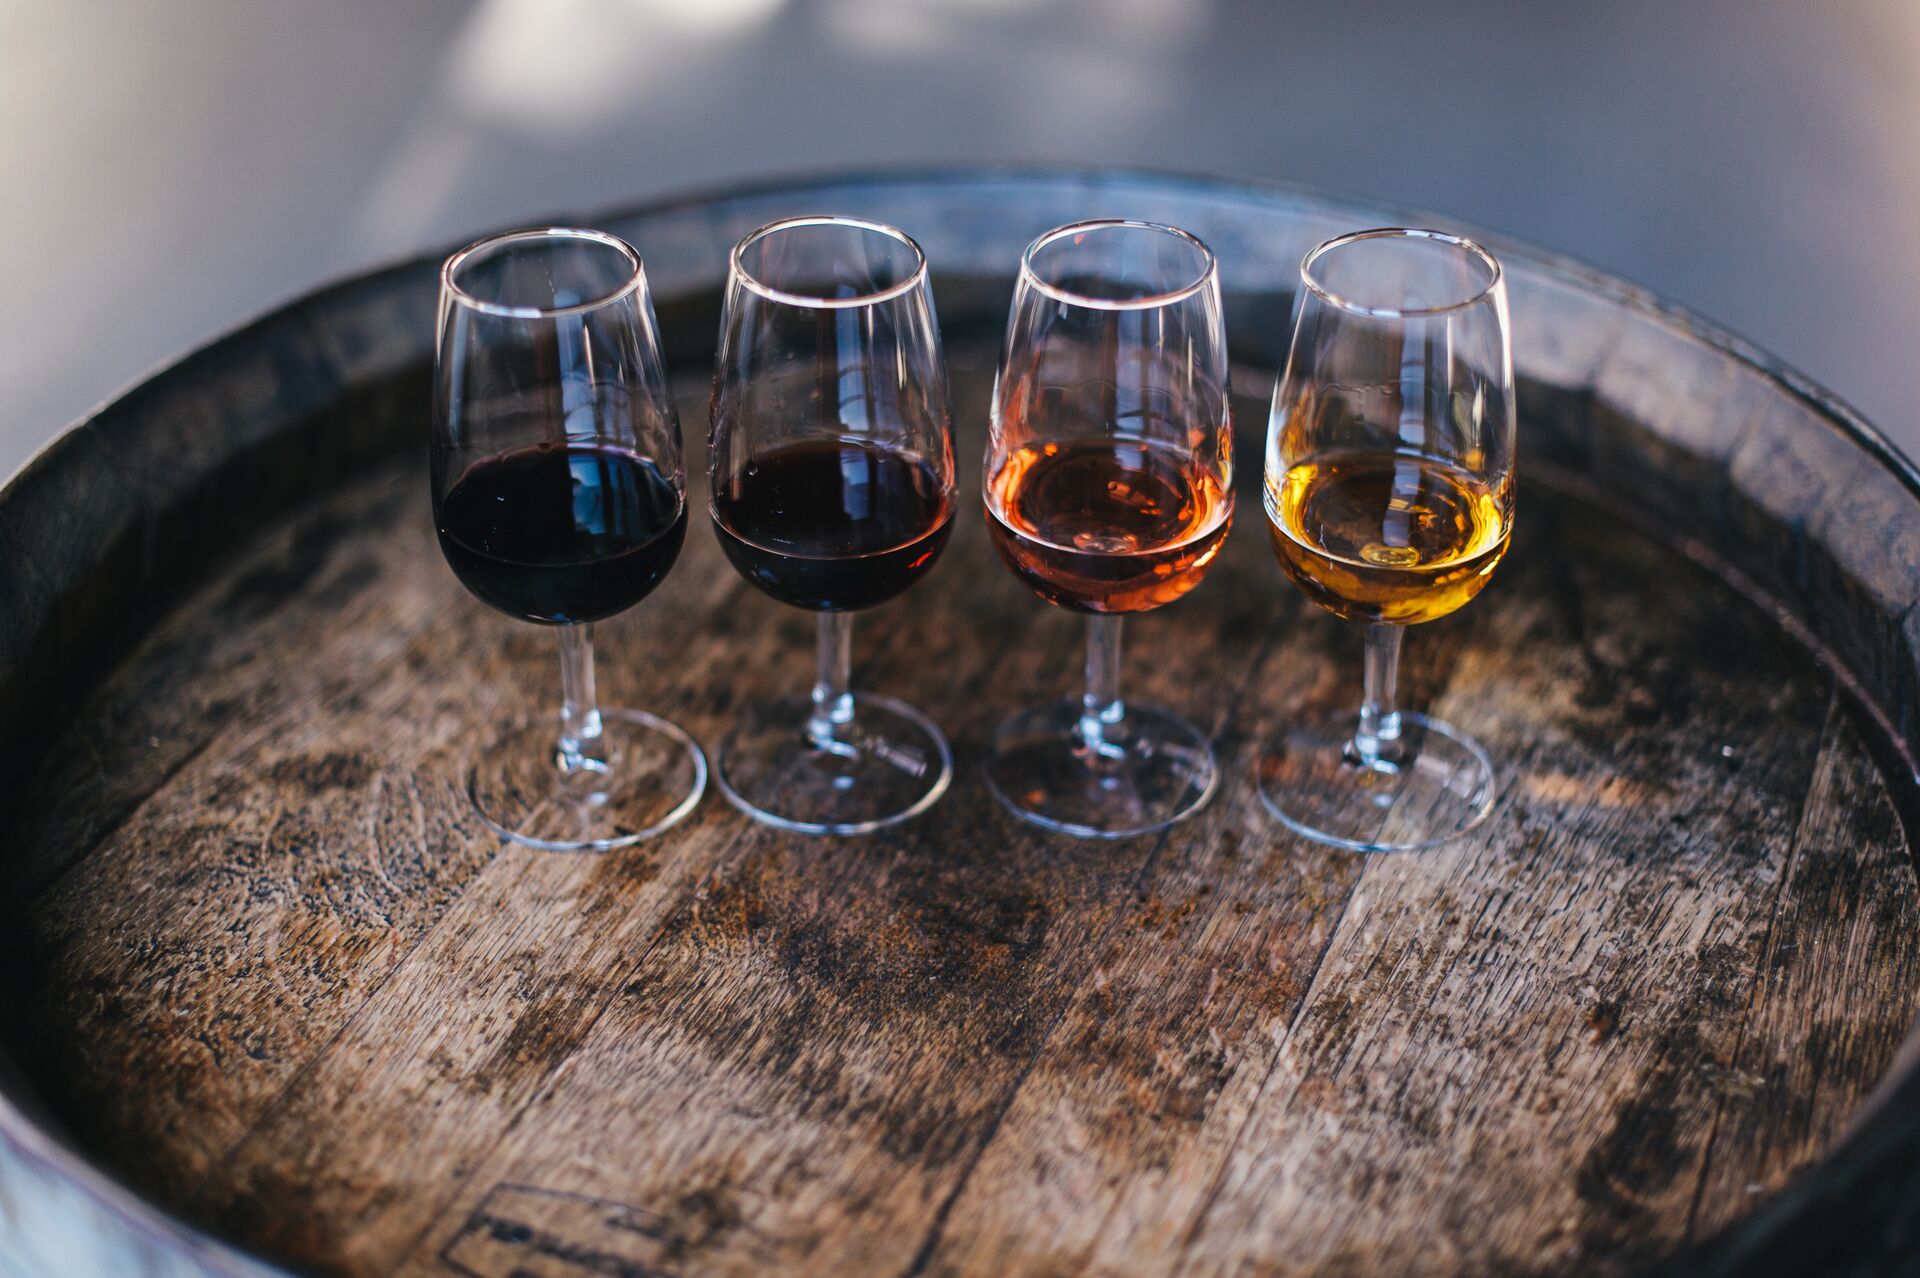 Four glasses, half full of various coloured port wine stand lined up ready for a tasting, set upon an old oak barrel.